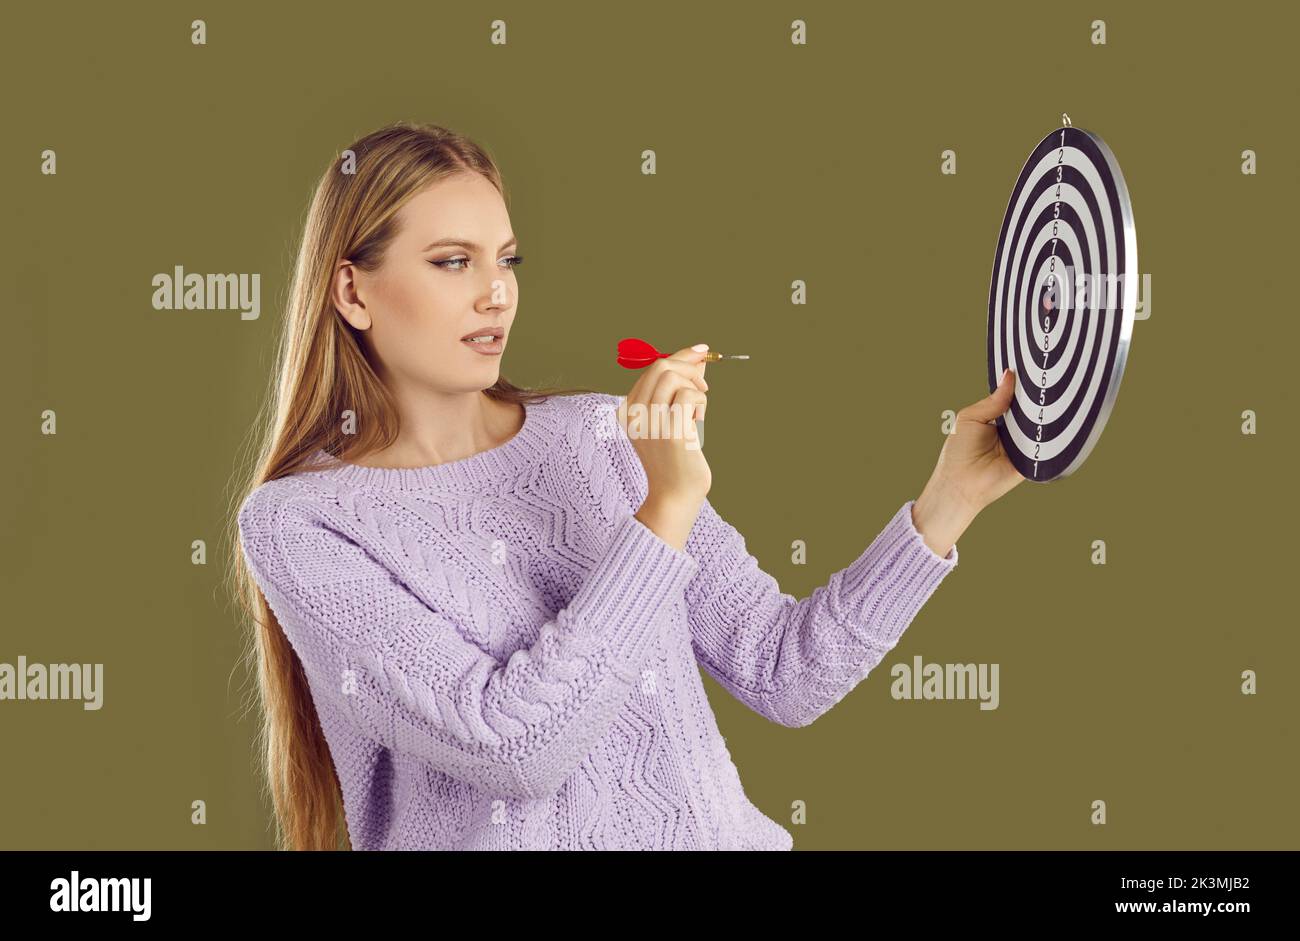 Serious young woman sets a business goal and aims a dart arrow at a shooting target Stock Photo